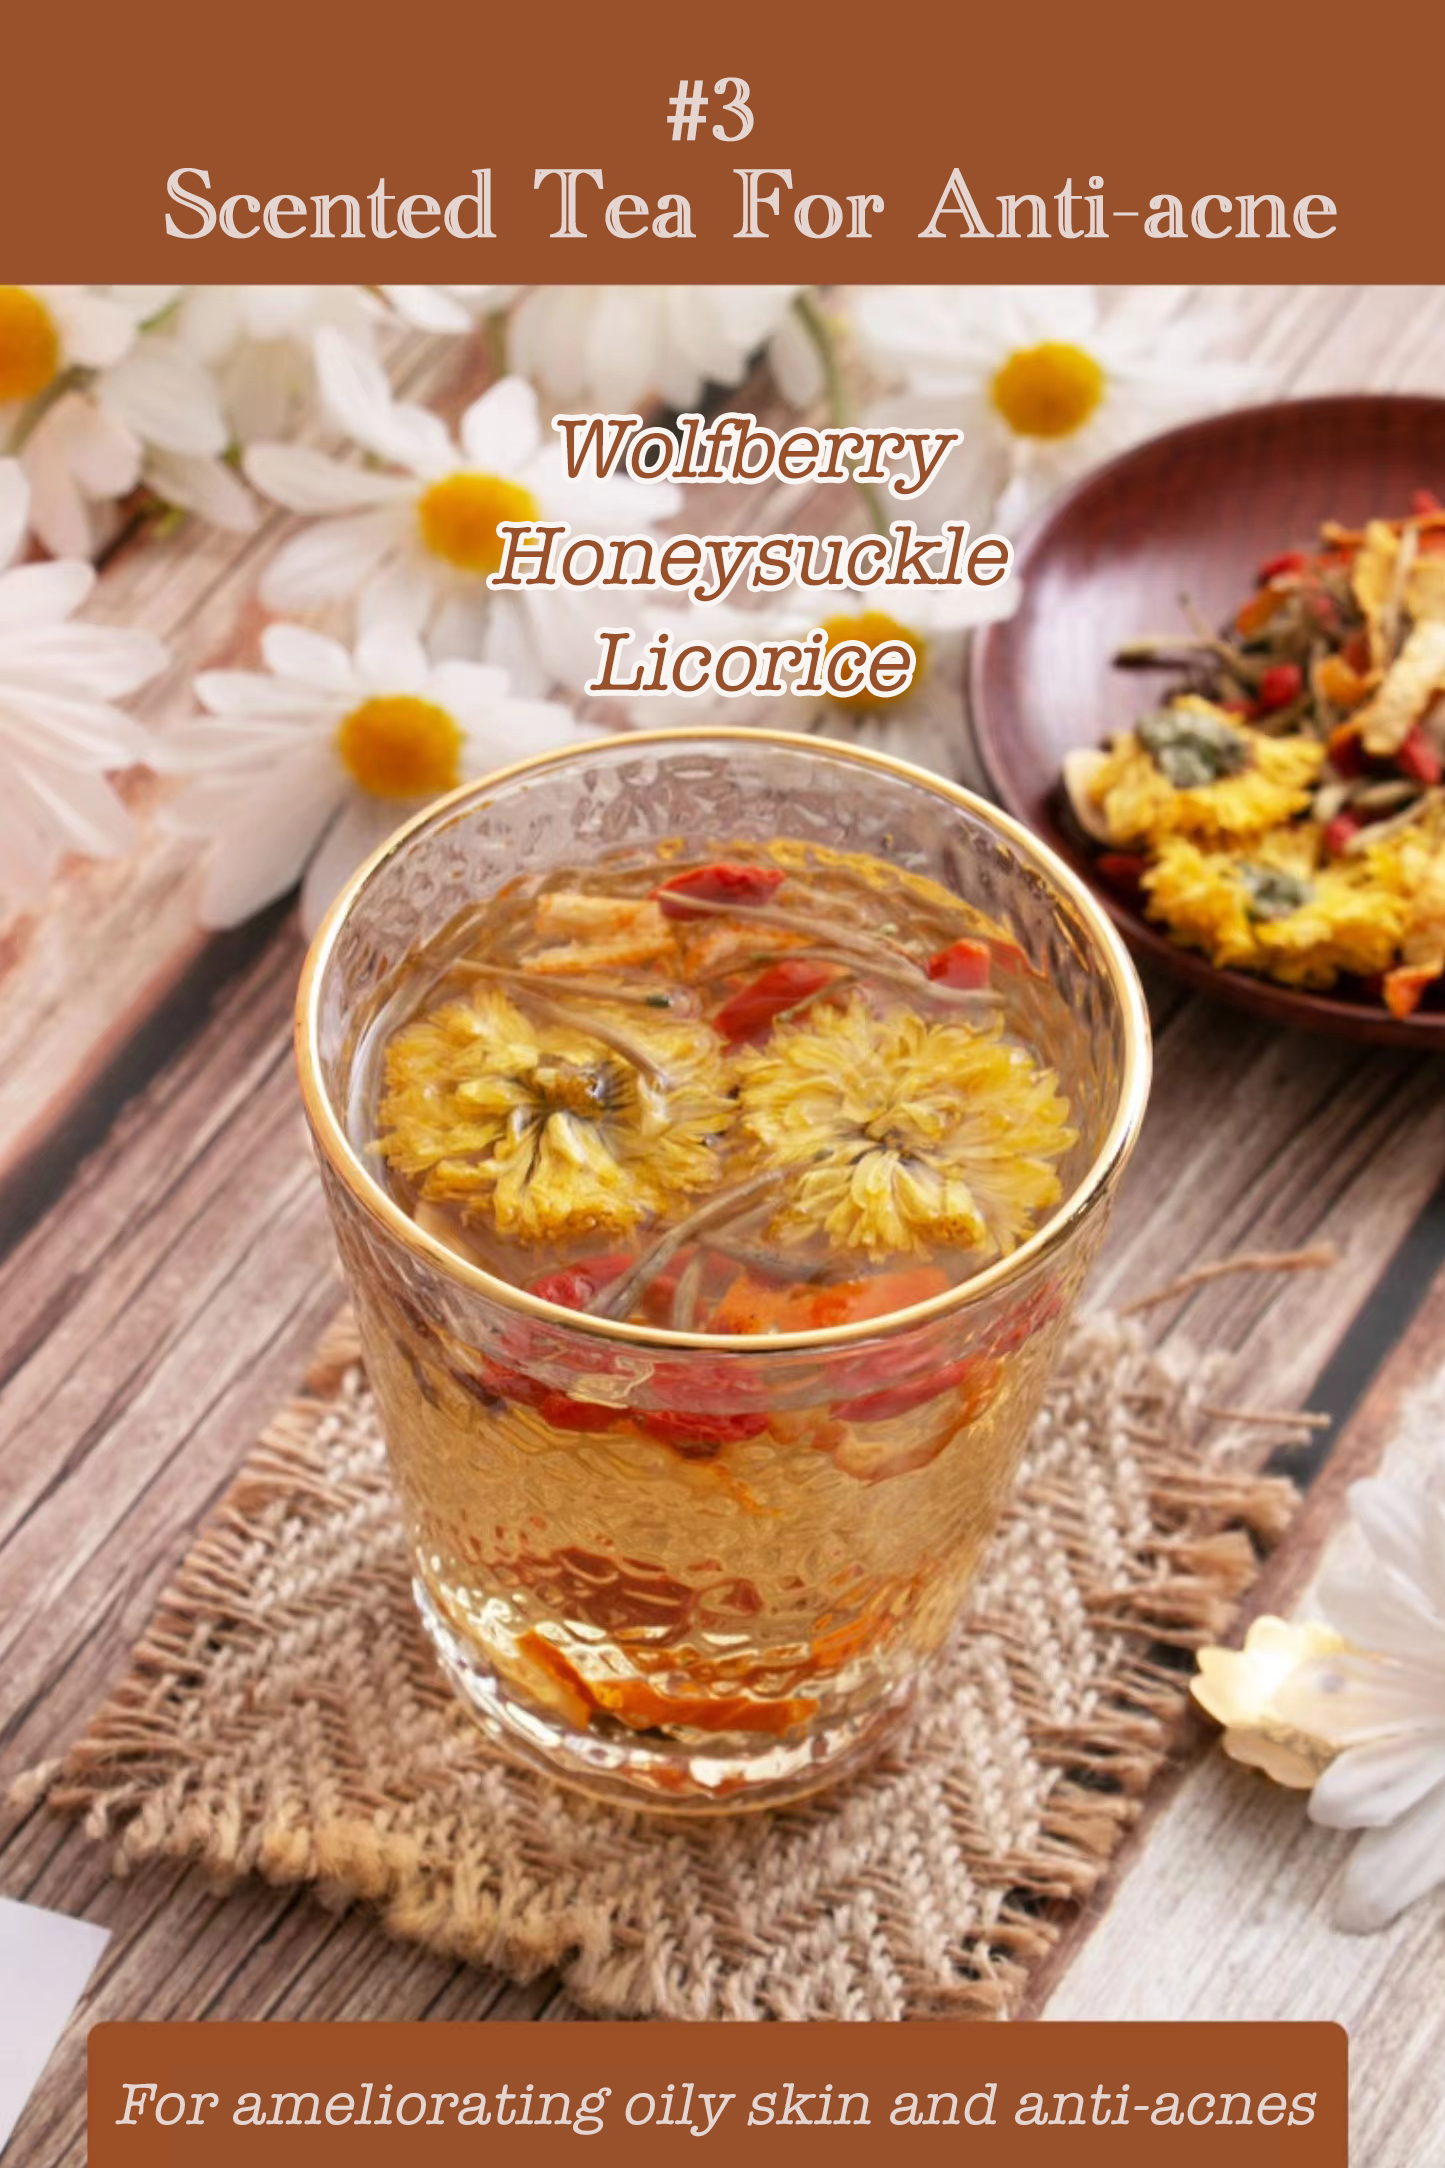 Wolfberry Honeysuckle Licorice tea in a glass cup, making flower tea for reduce oily skin and anti-acne